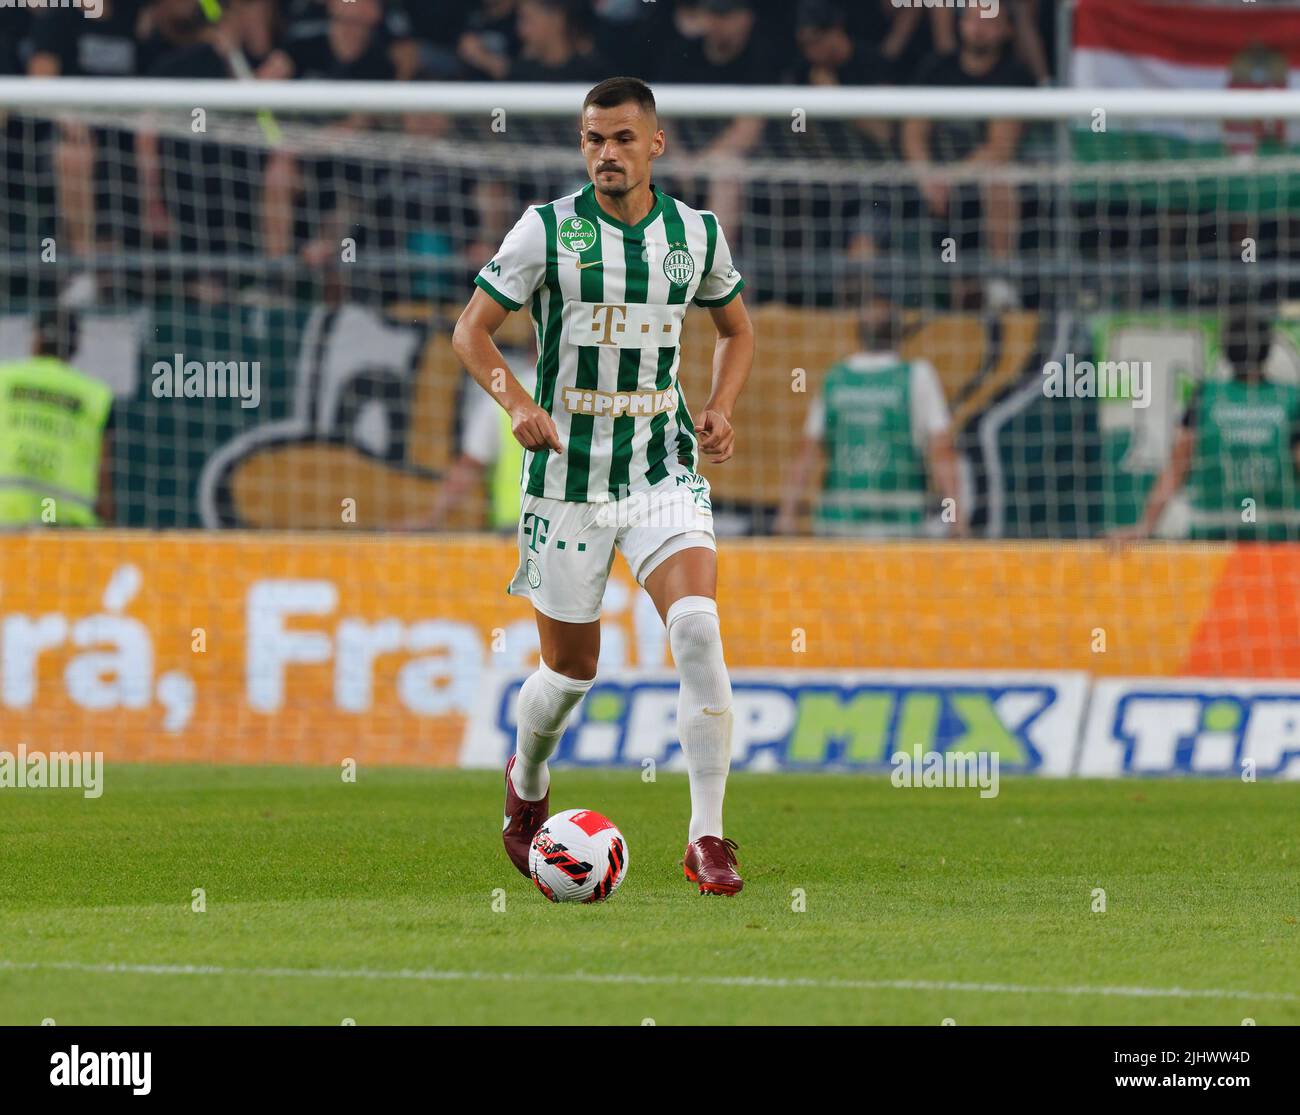 BUDAPEST, HUNGARY - JULY 20: Adnan Kovacevic of Ferencvarosi TC controls the ball during the UEFA Champions League Second Qualifying Round First Leg match between Ferencvarosi TC and SK Slovan Bratislava at Ferencvaros Stadium on July 20, 2022 in Budapest, Hungary. Stock Photo